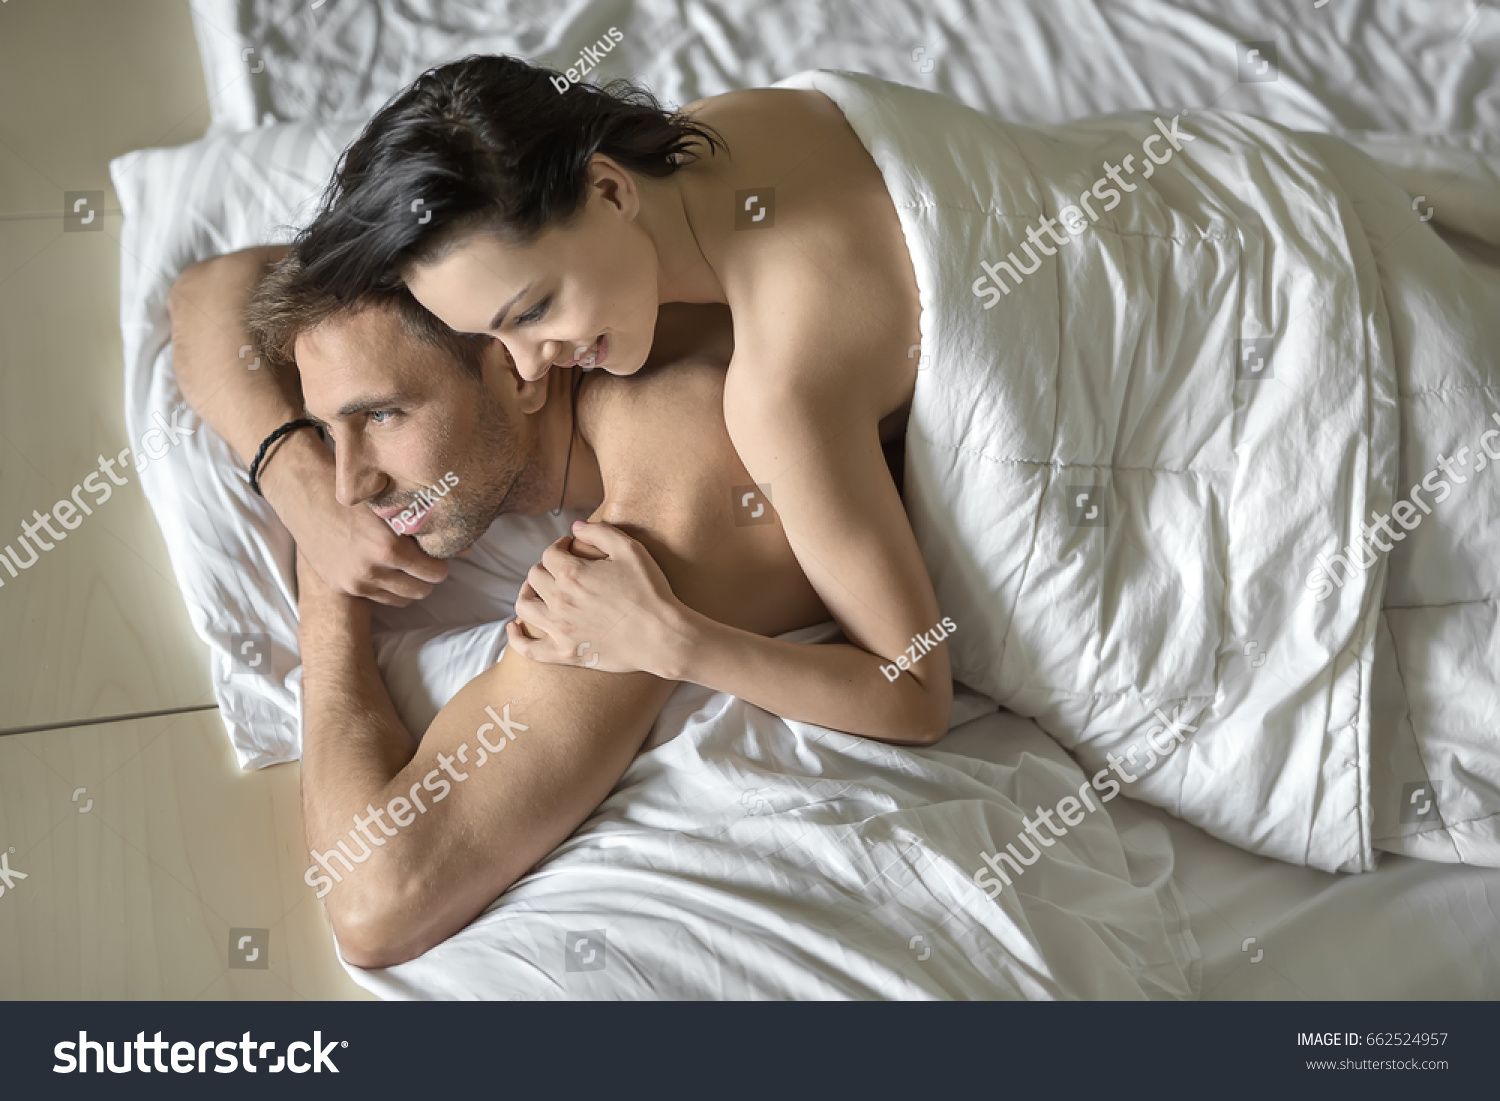 Naked Boy And Girl Laying Pic